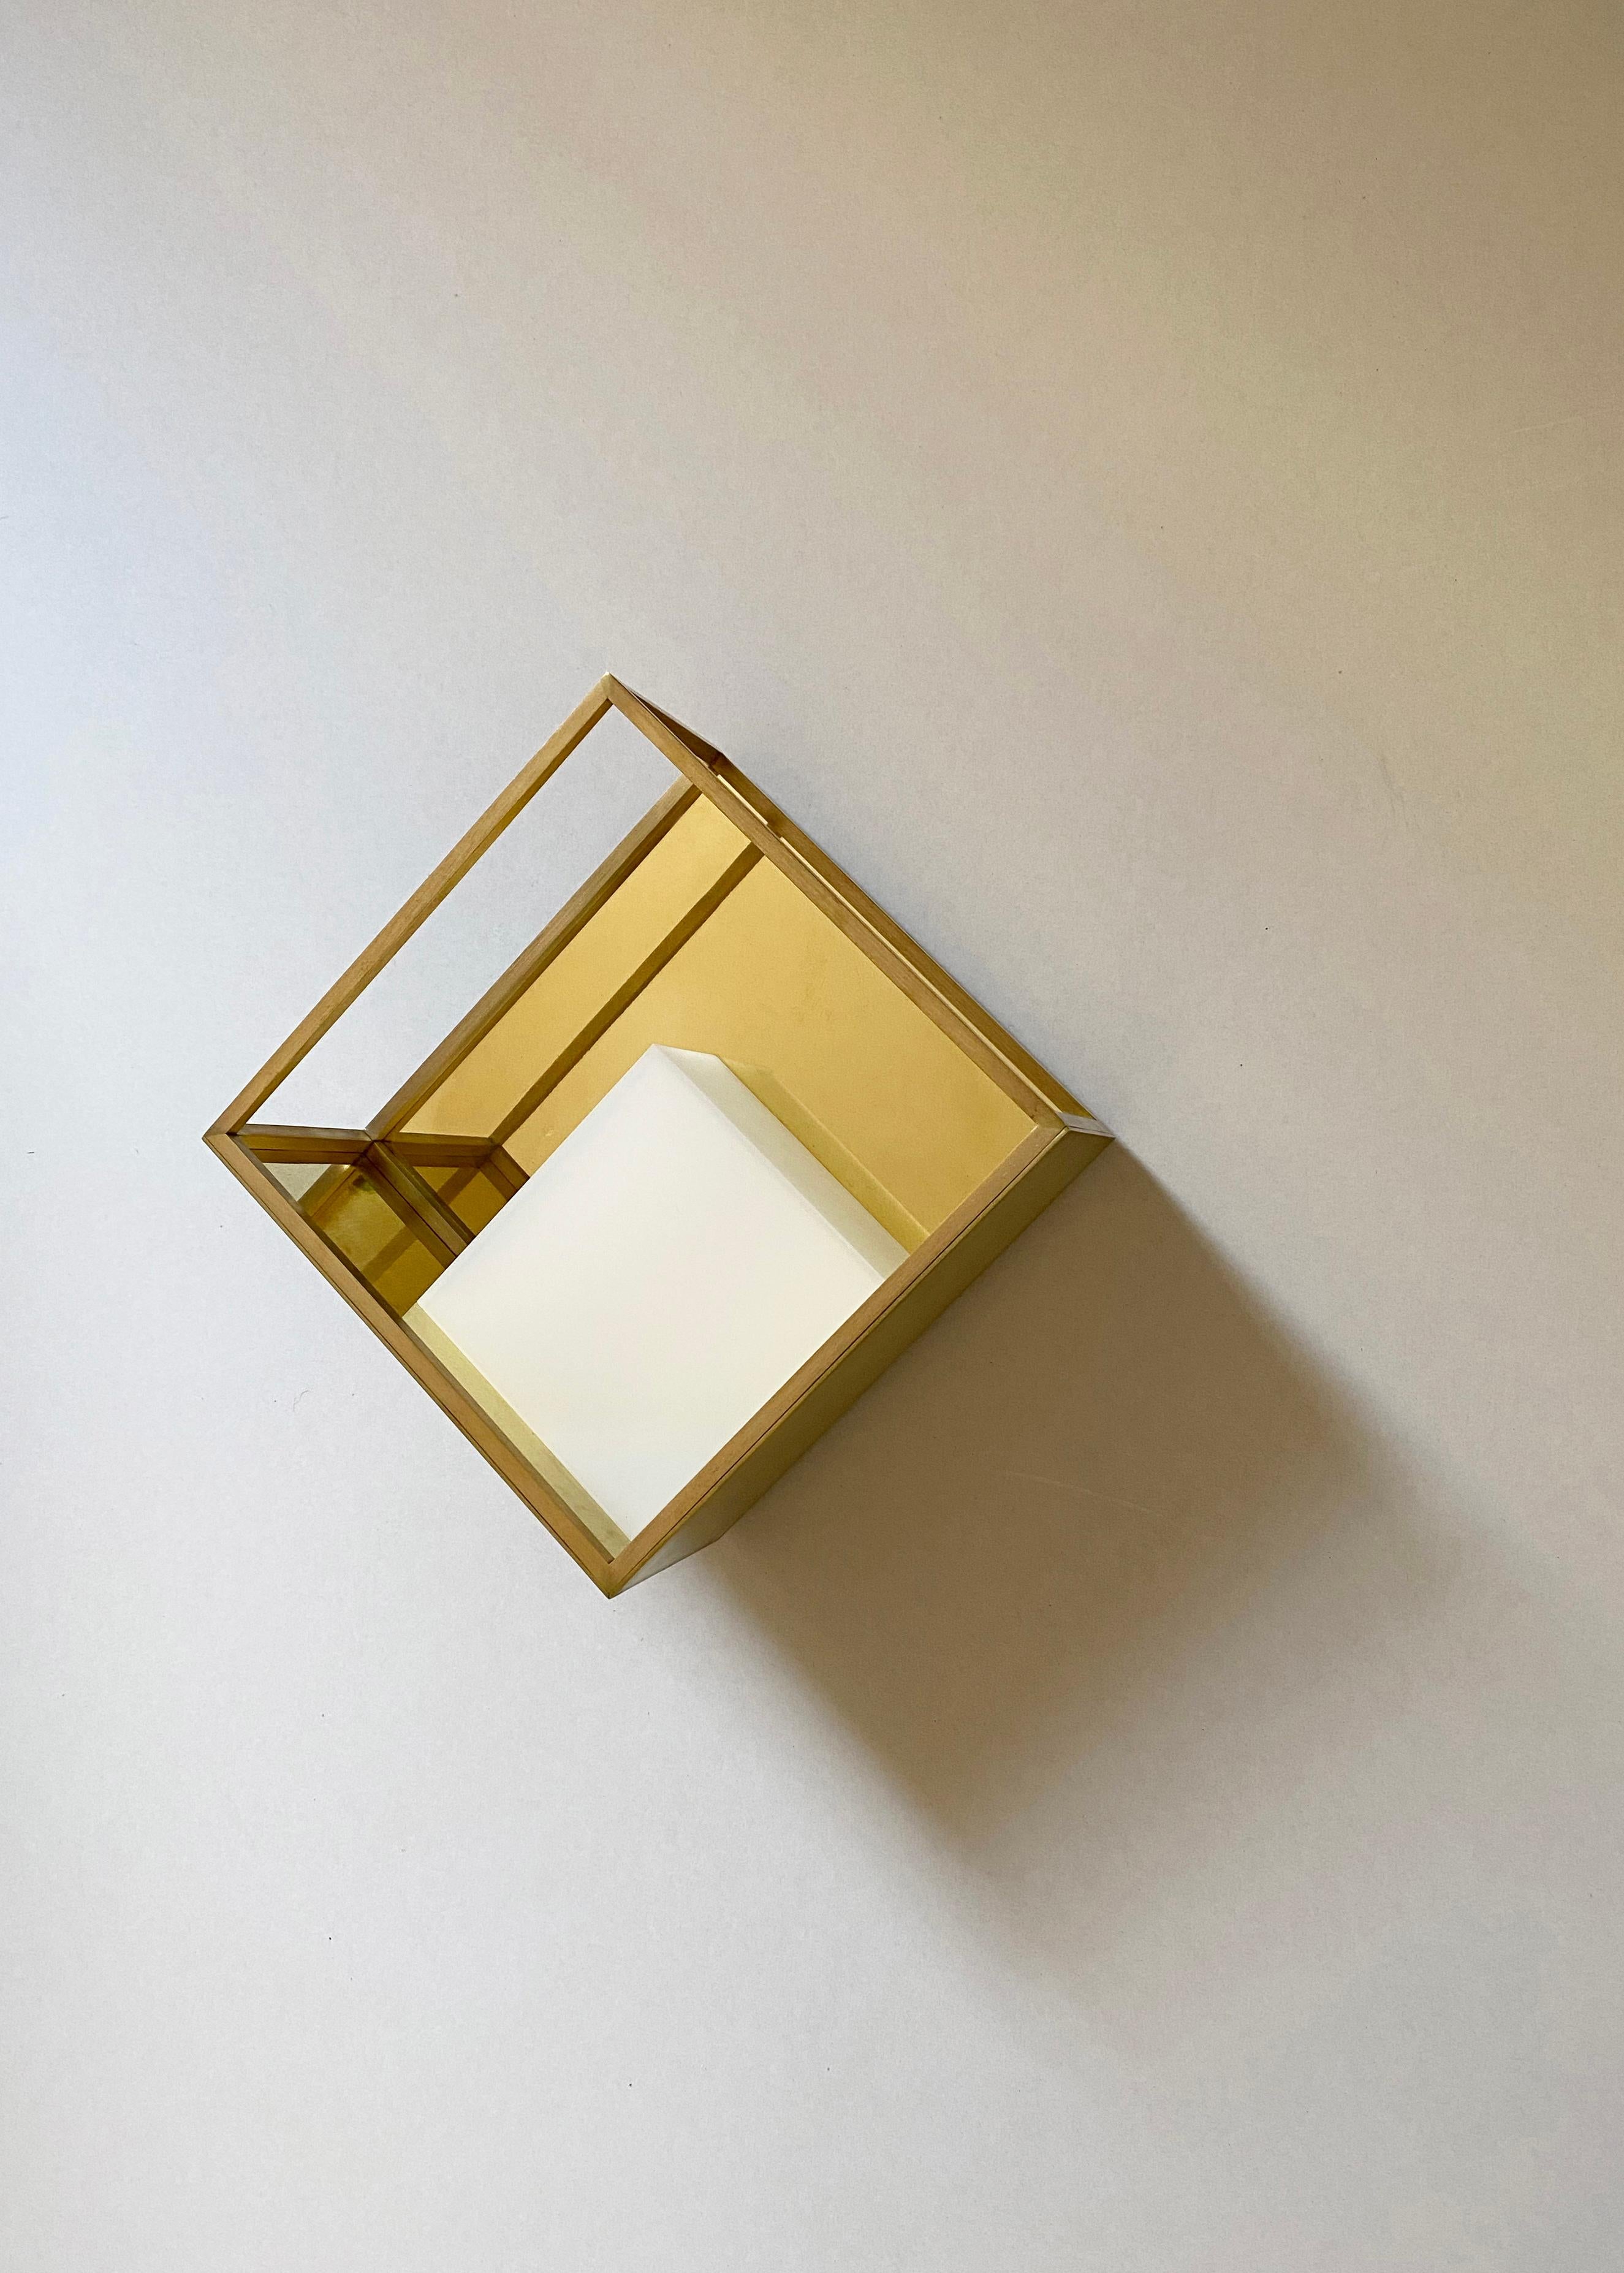 Wiso is a wall light that displays the growth patterns of natural crystals in their multiple scales. The outer brass frame encases some polished surfaces that, under daylight, reflect in a warm tone the colours of the surrounding environment

When